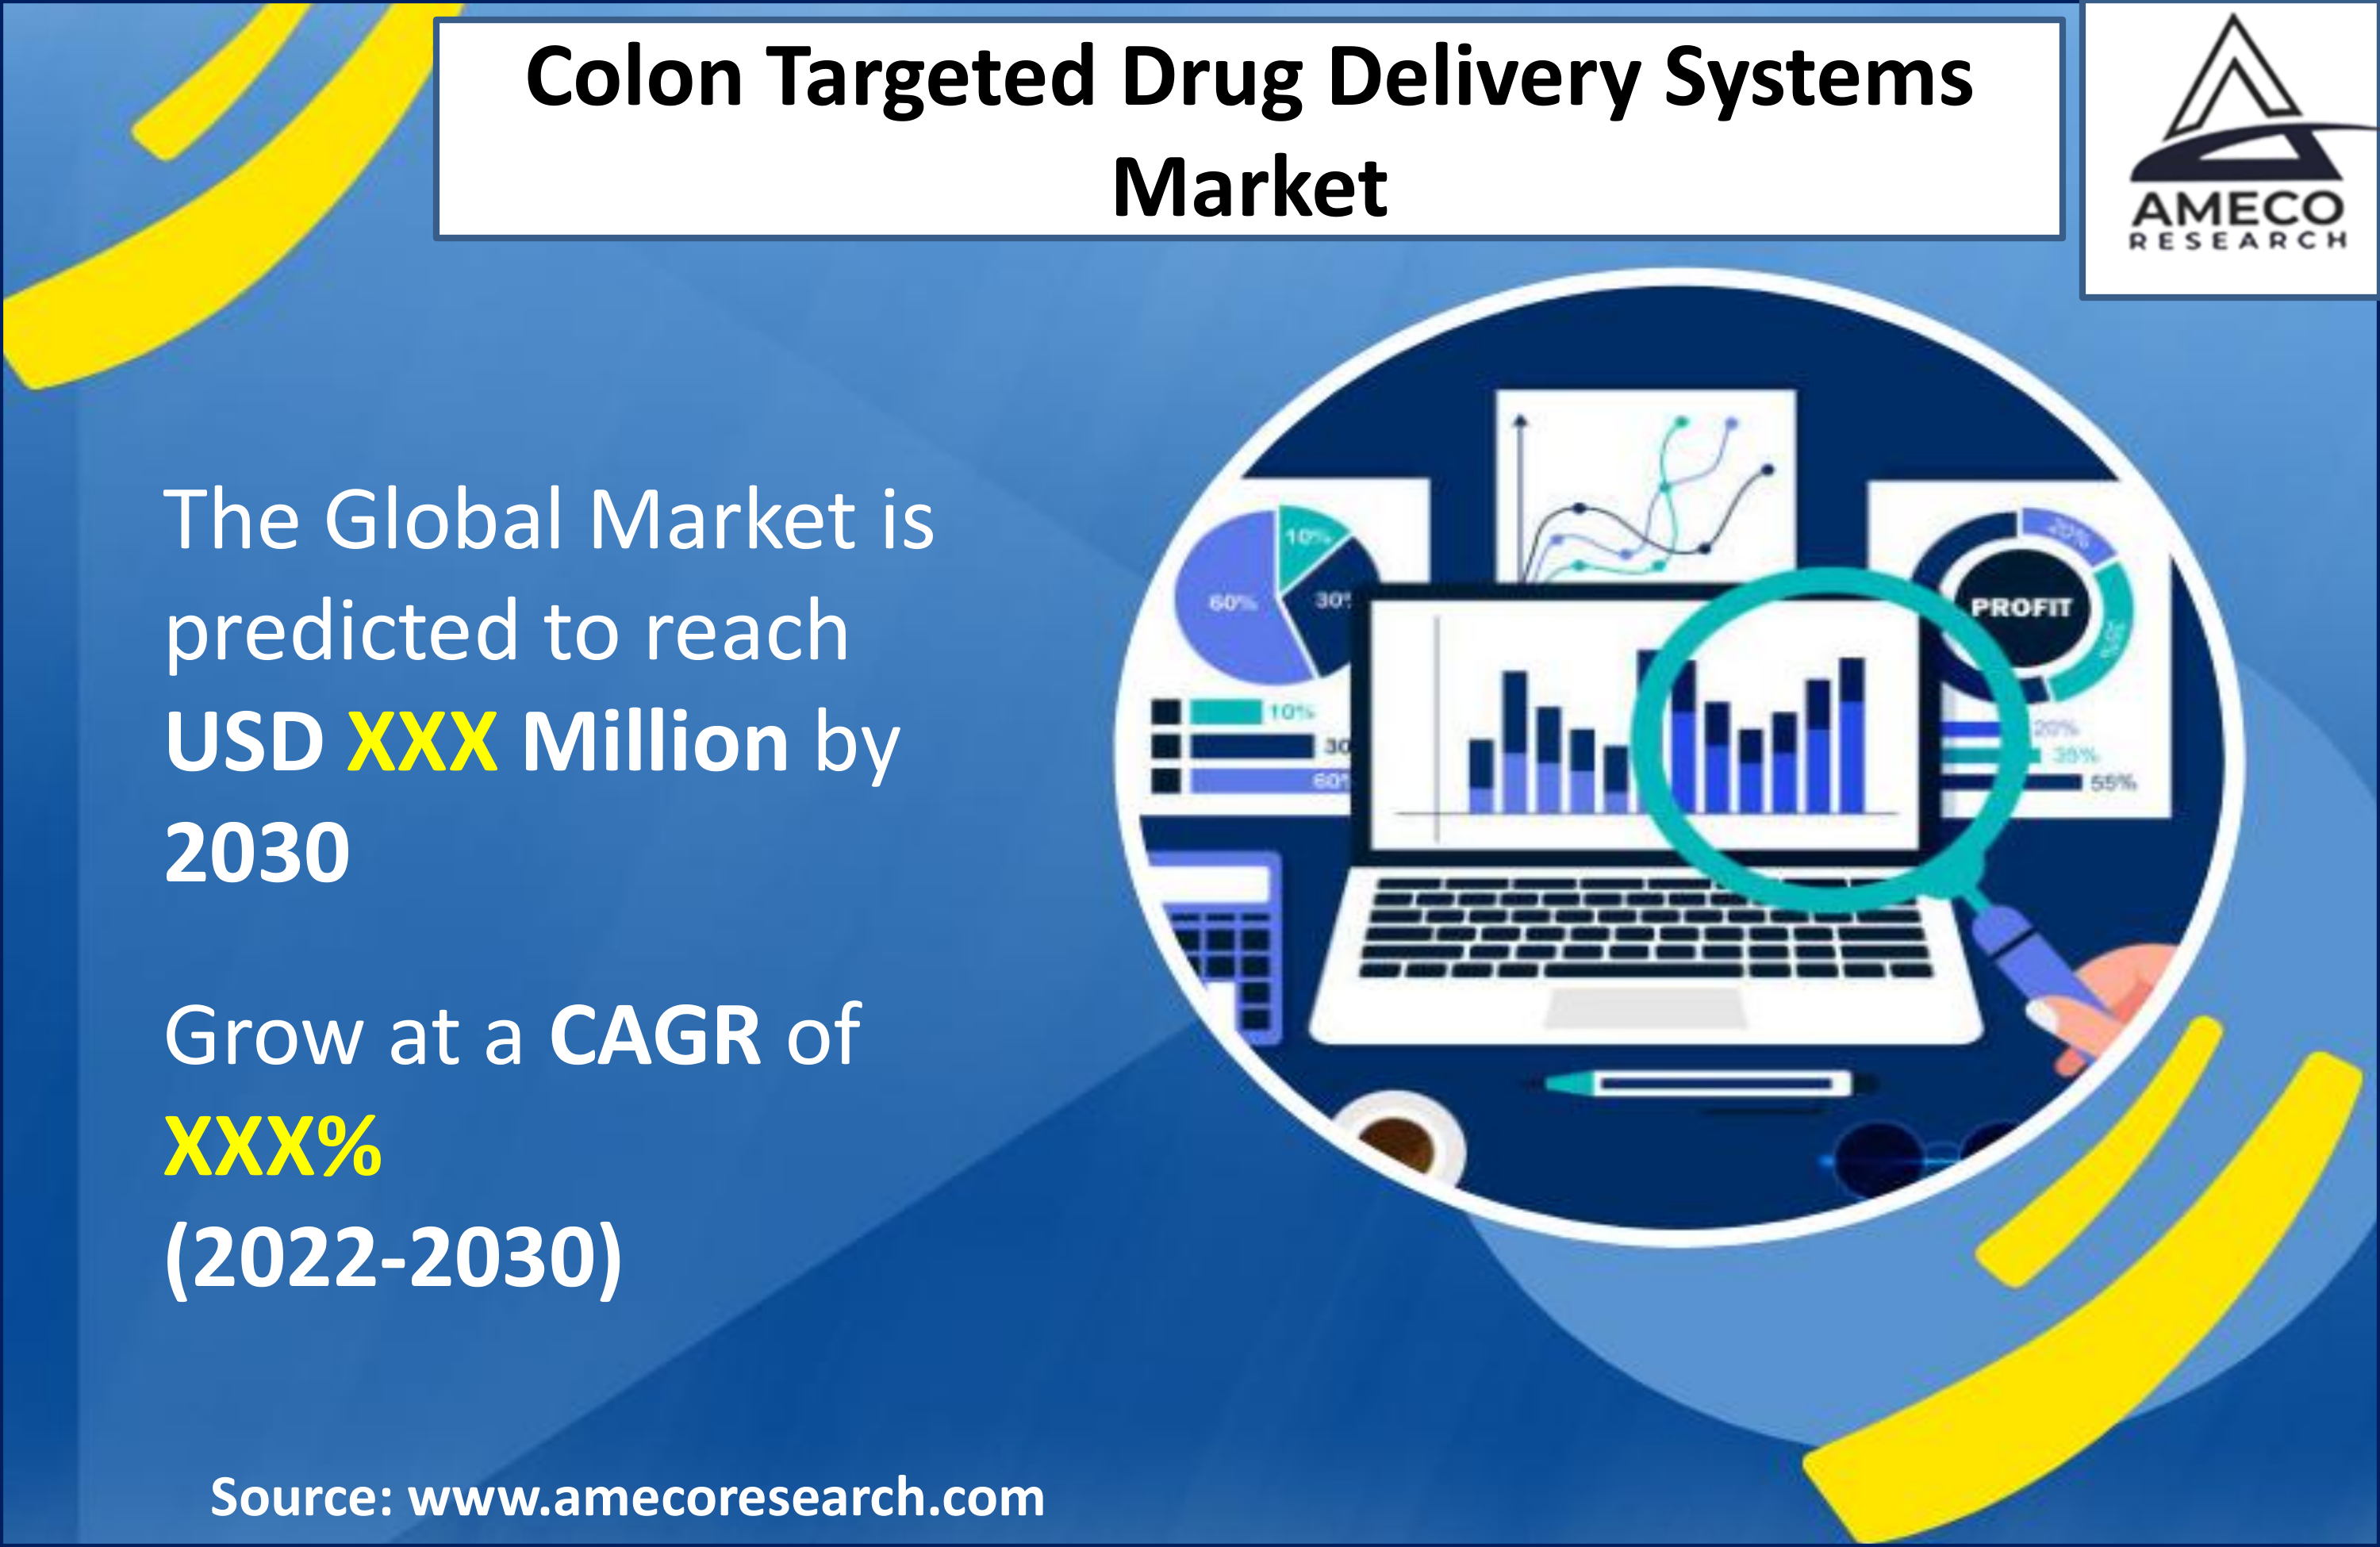 Colon Targeted Drug Delivery Systems Market